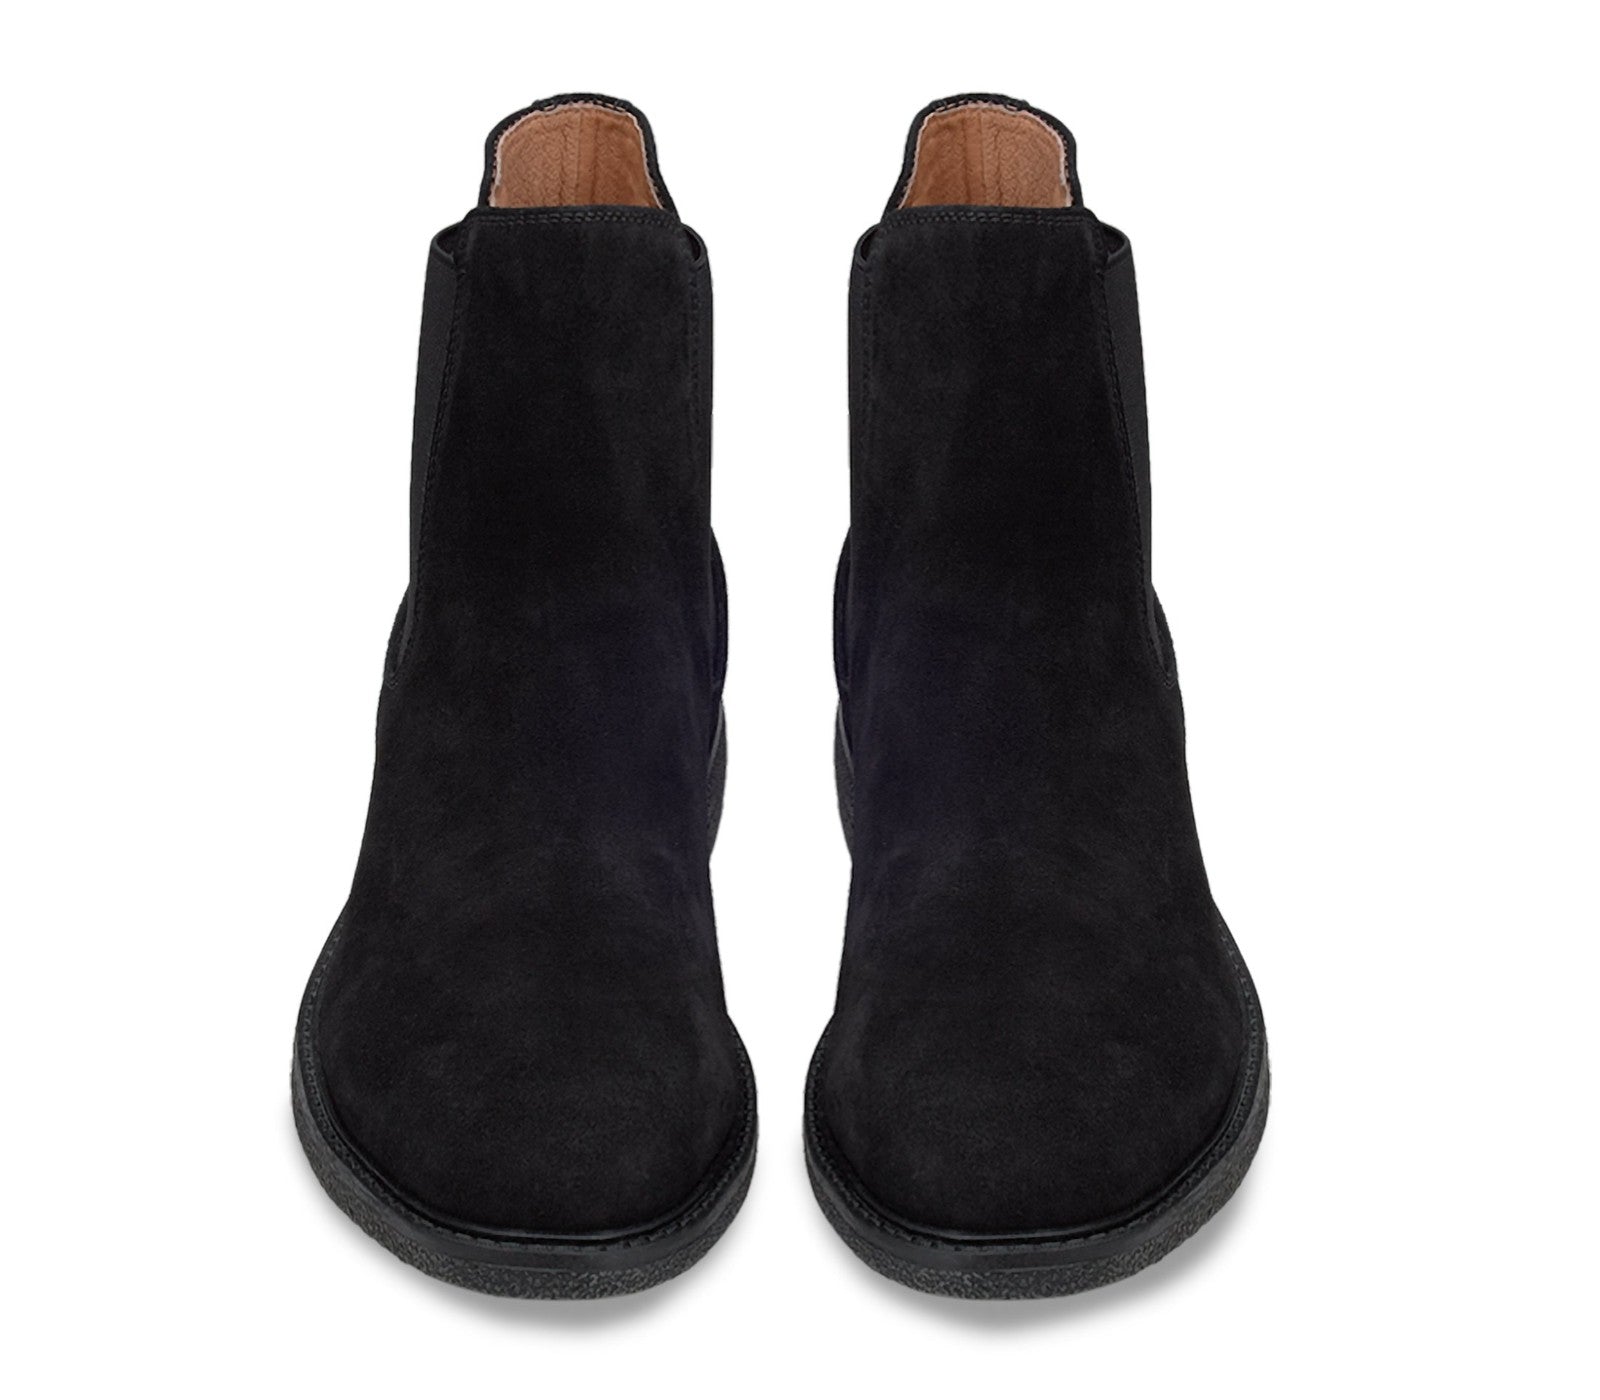 Men's Chelsea Boots in Black Suede with Elasticized Inserts